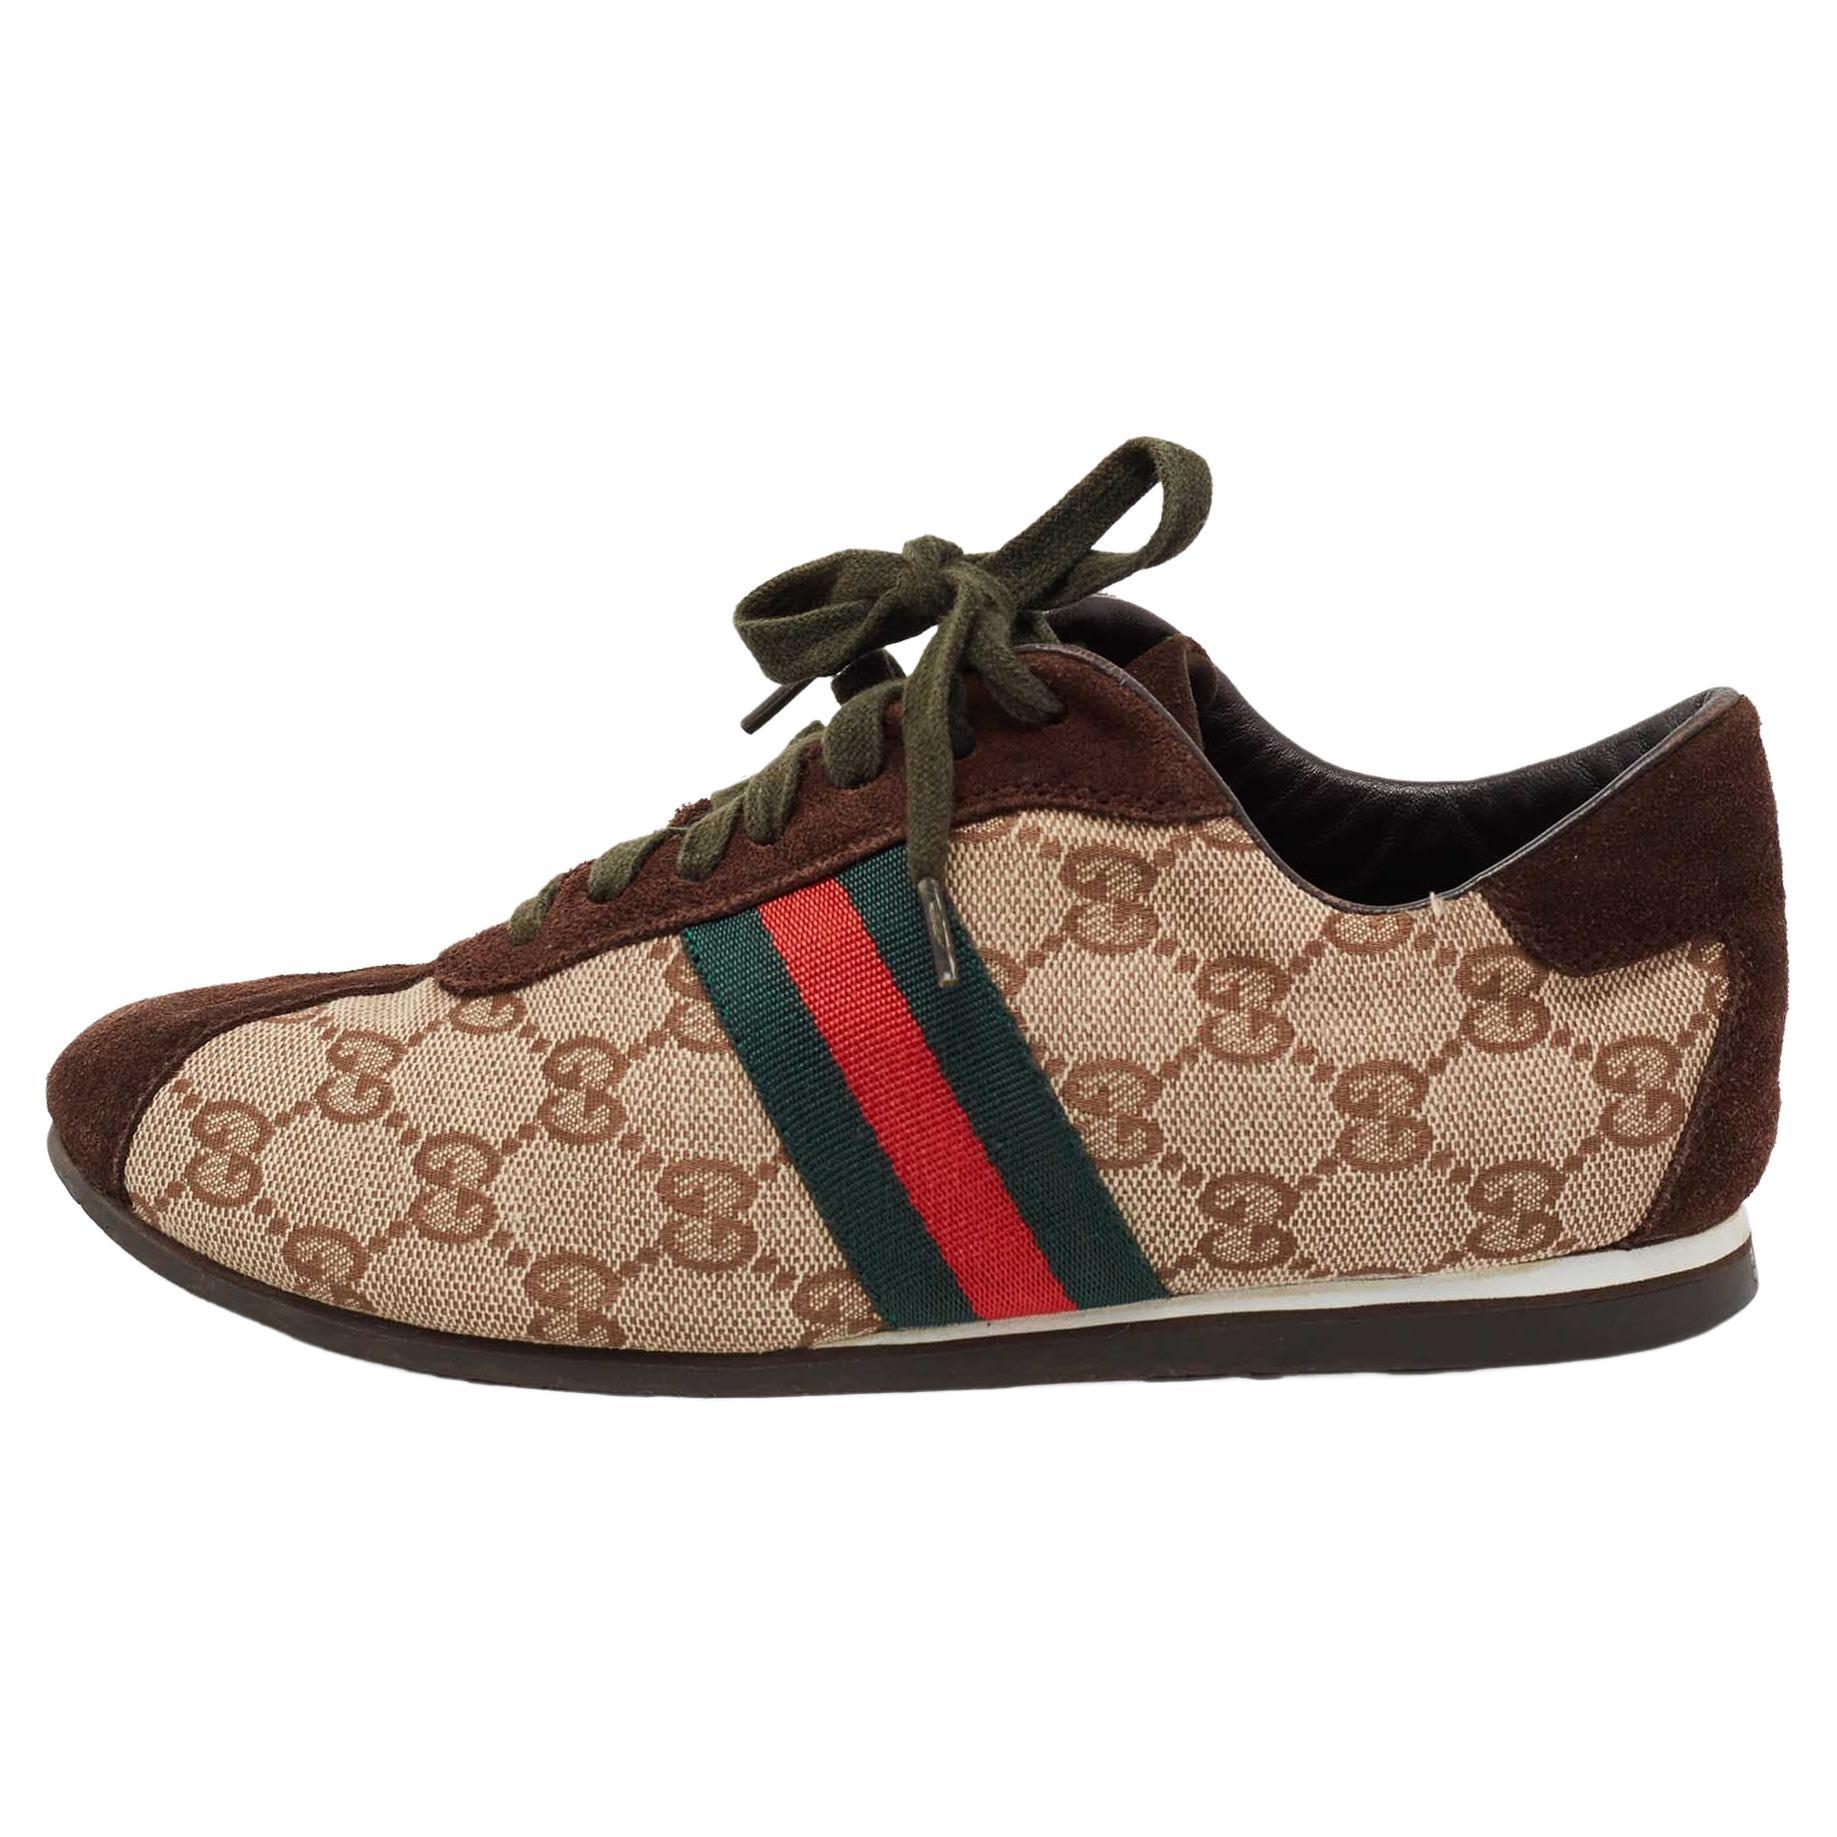 Gucci Brown/Beige Suede and GG Canvas Web Low-Top Sneakers Size 37